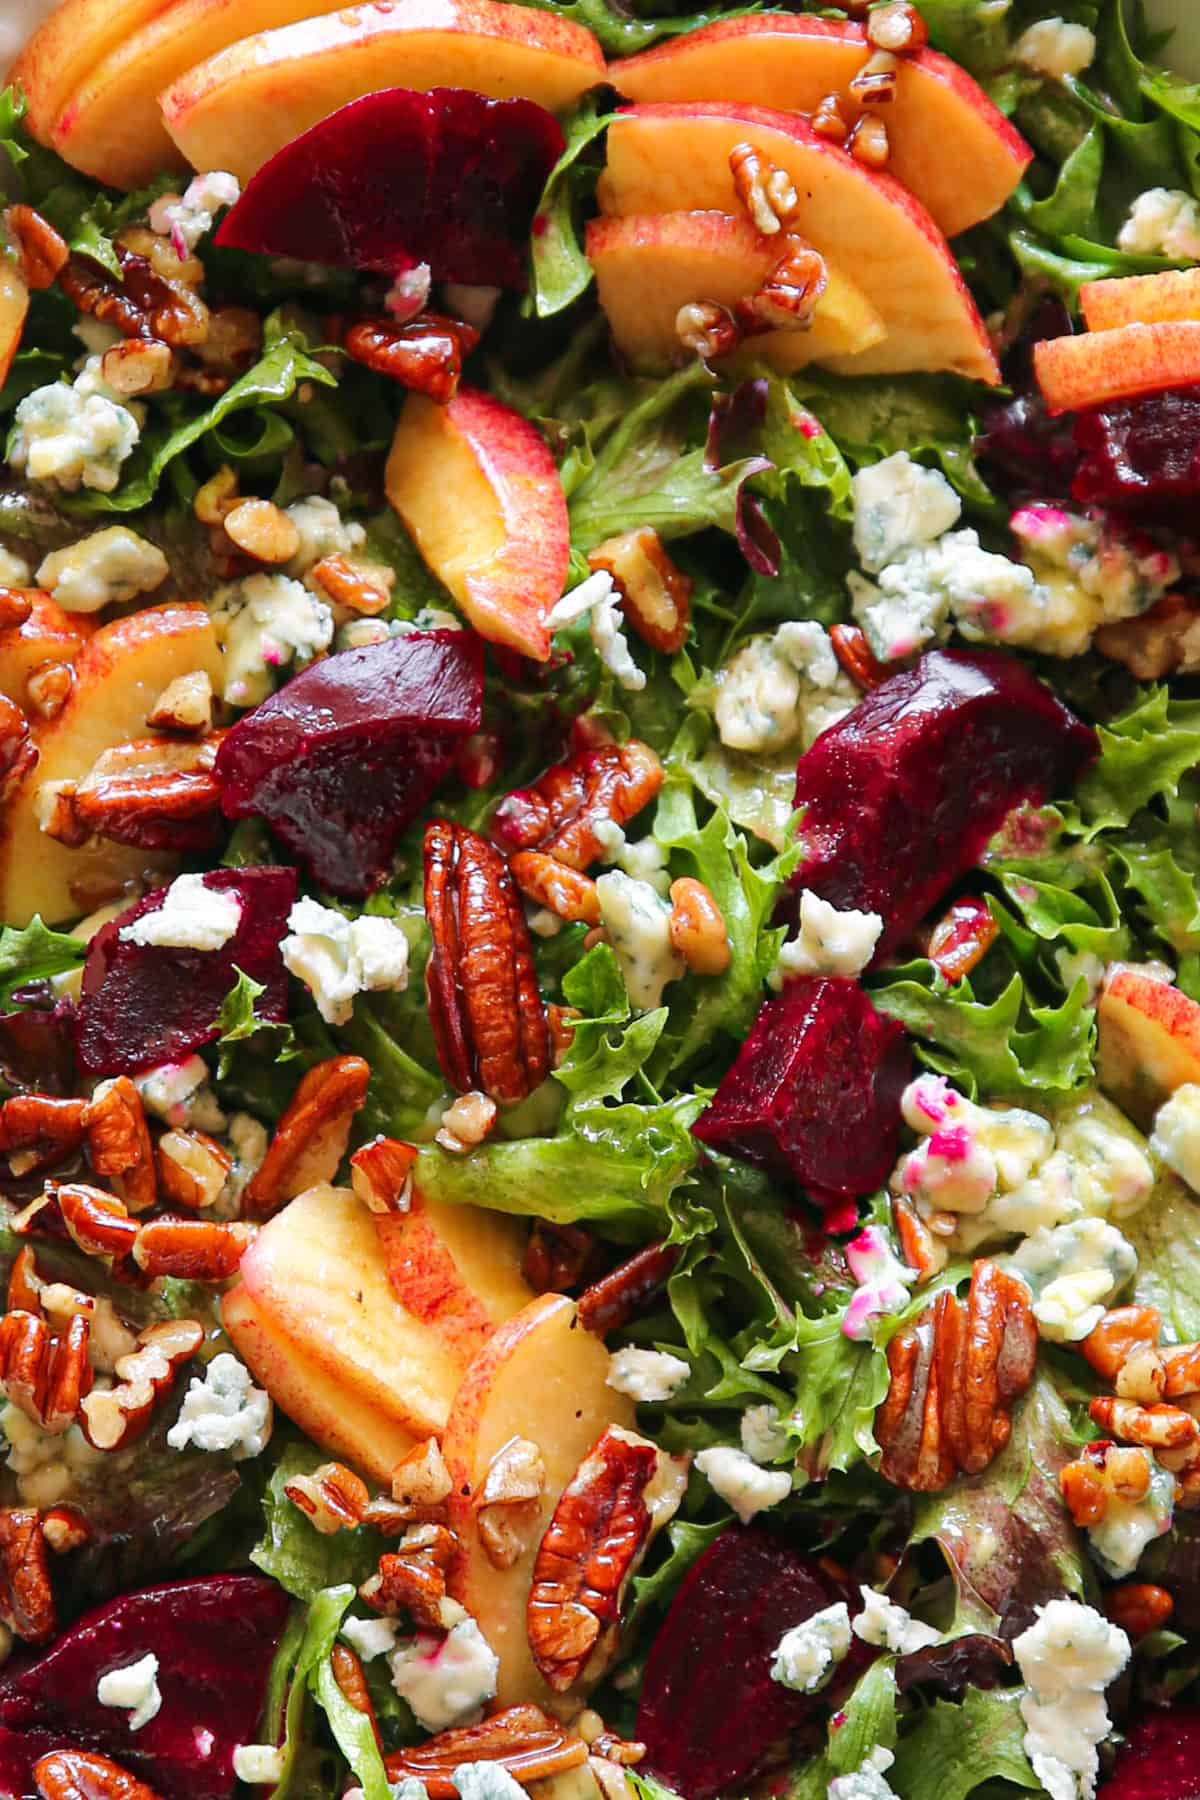 Beet and Apple Salad with Mixed Greens, Pecans, Blue Cheese - close-up photo.